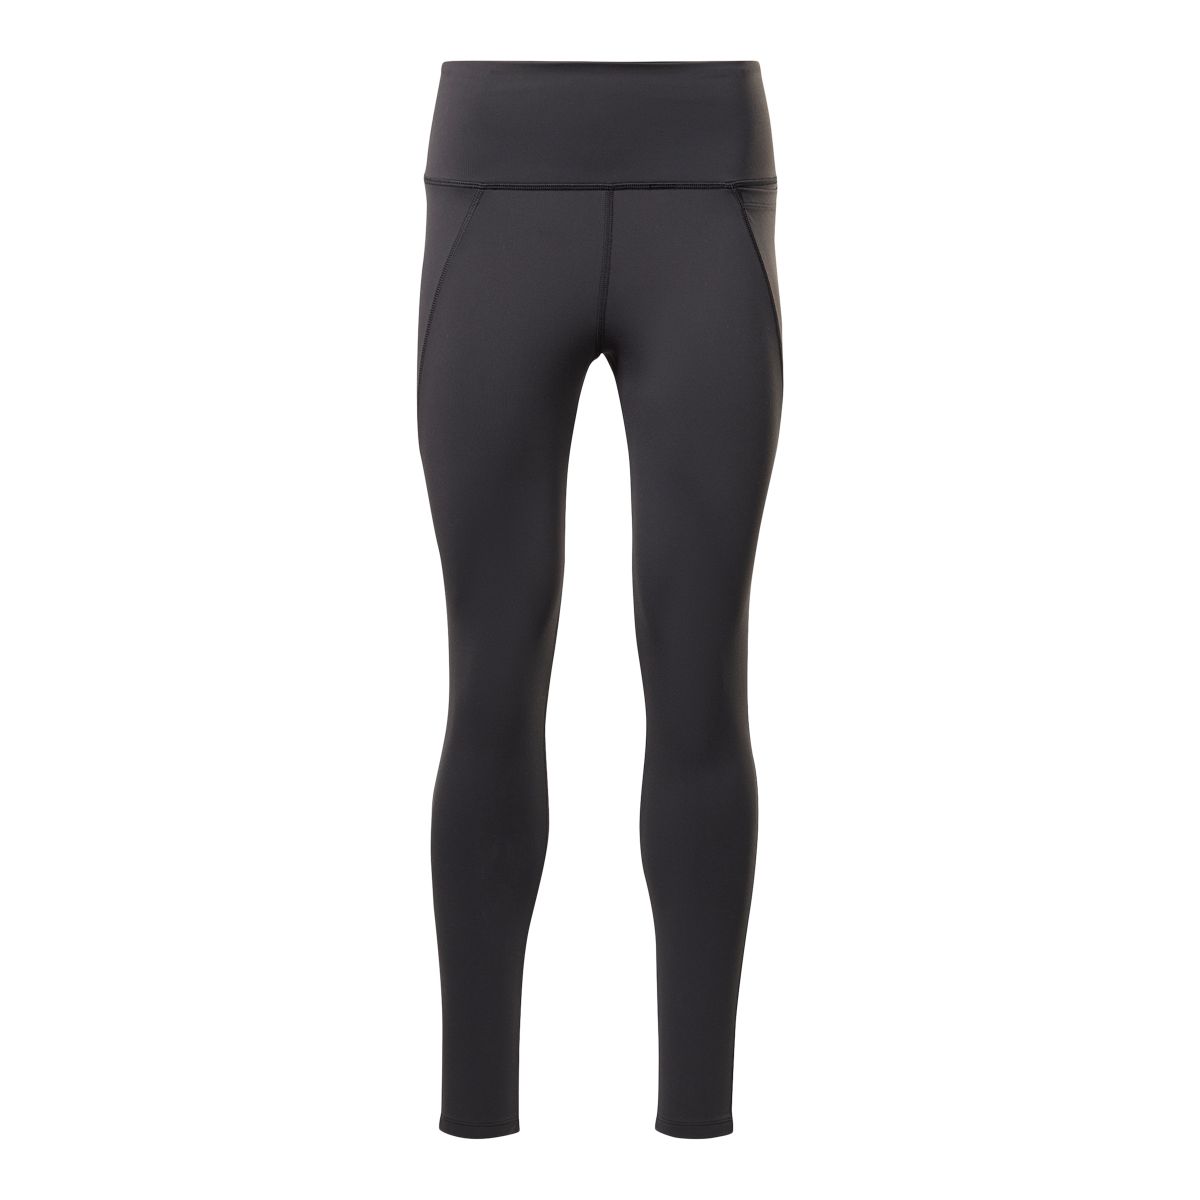 4 Brand new pairs of Yogalicious Lux black leggings, XS. 4 times the money.  Total bid is quantity times bid price. - Rocky Mountain Estate Brokers Inc.